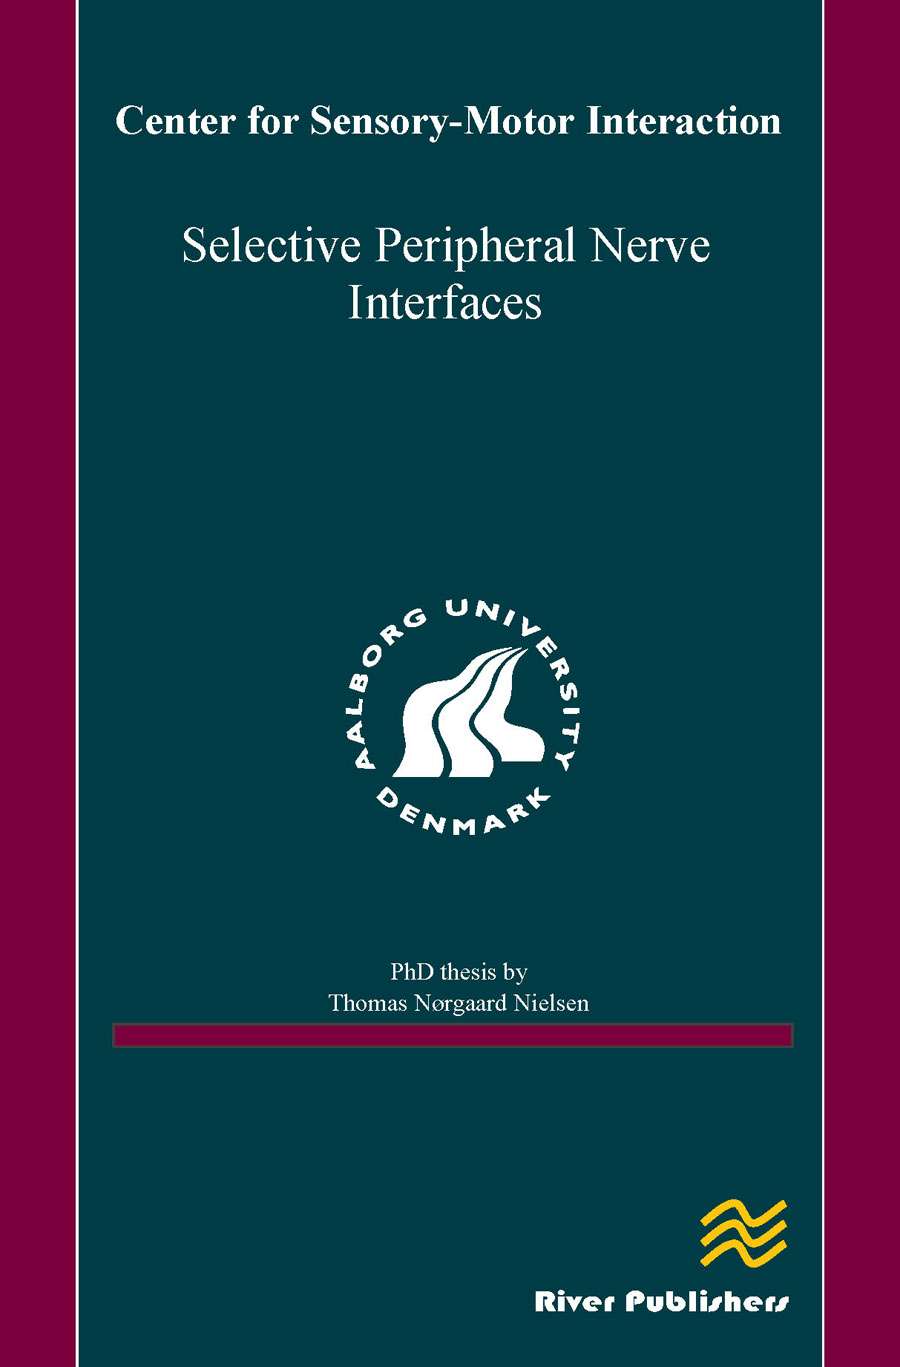 Selective Peripheral Nerve Interfaces